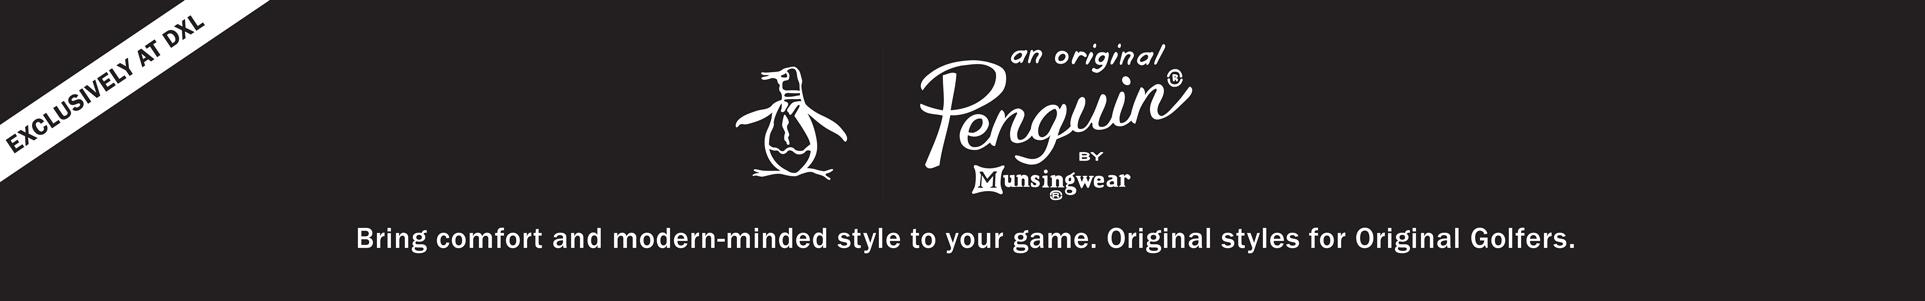 ORIGINAL PENGUIN | EXCLUSIVELY AT DXL | Bring comfort and modern-minded style to your game.